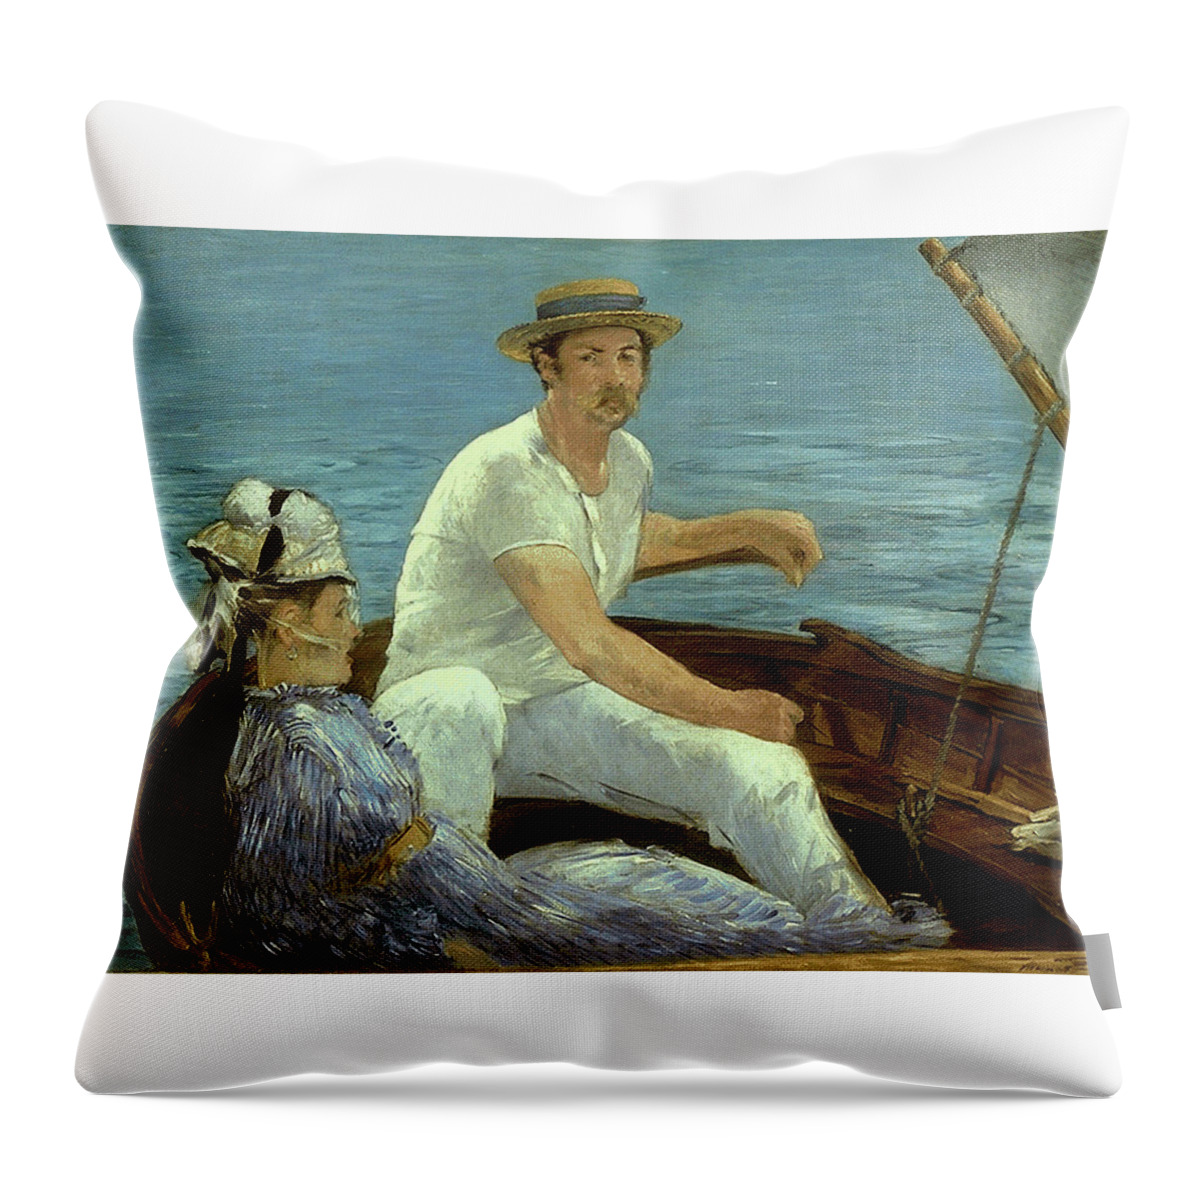 Boating Throw Pillow featuring the painting Boating by MotionAge Designs